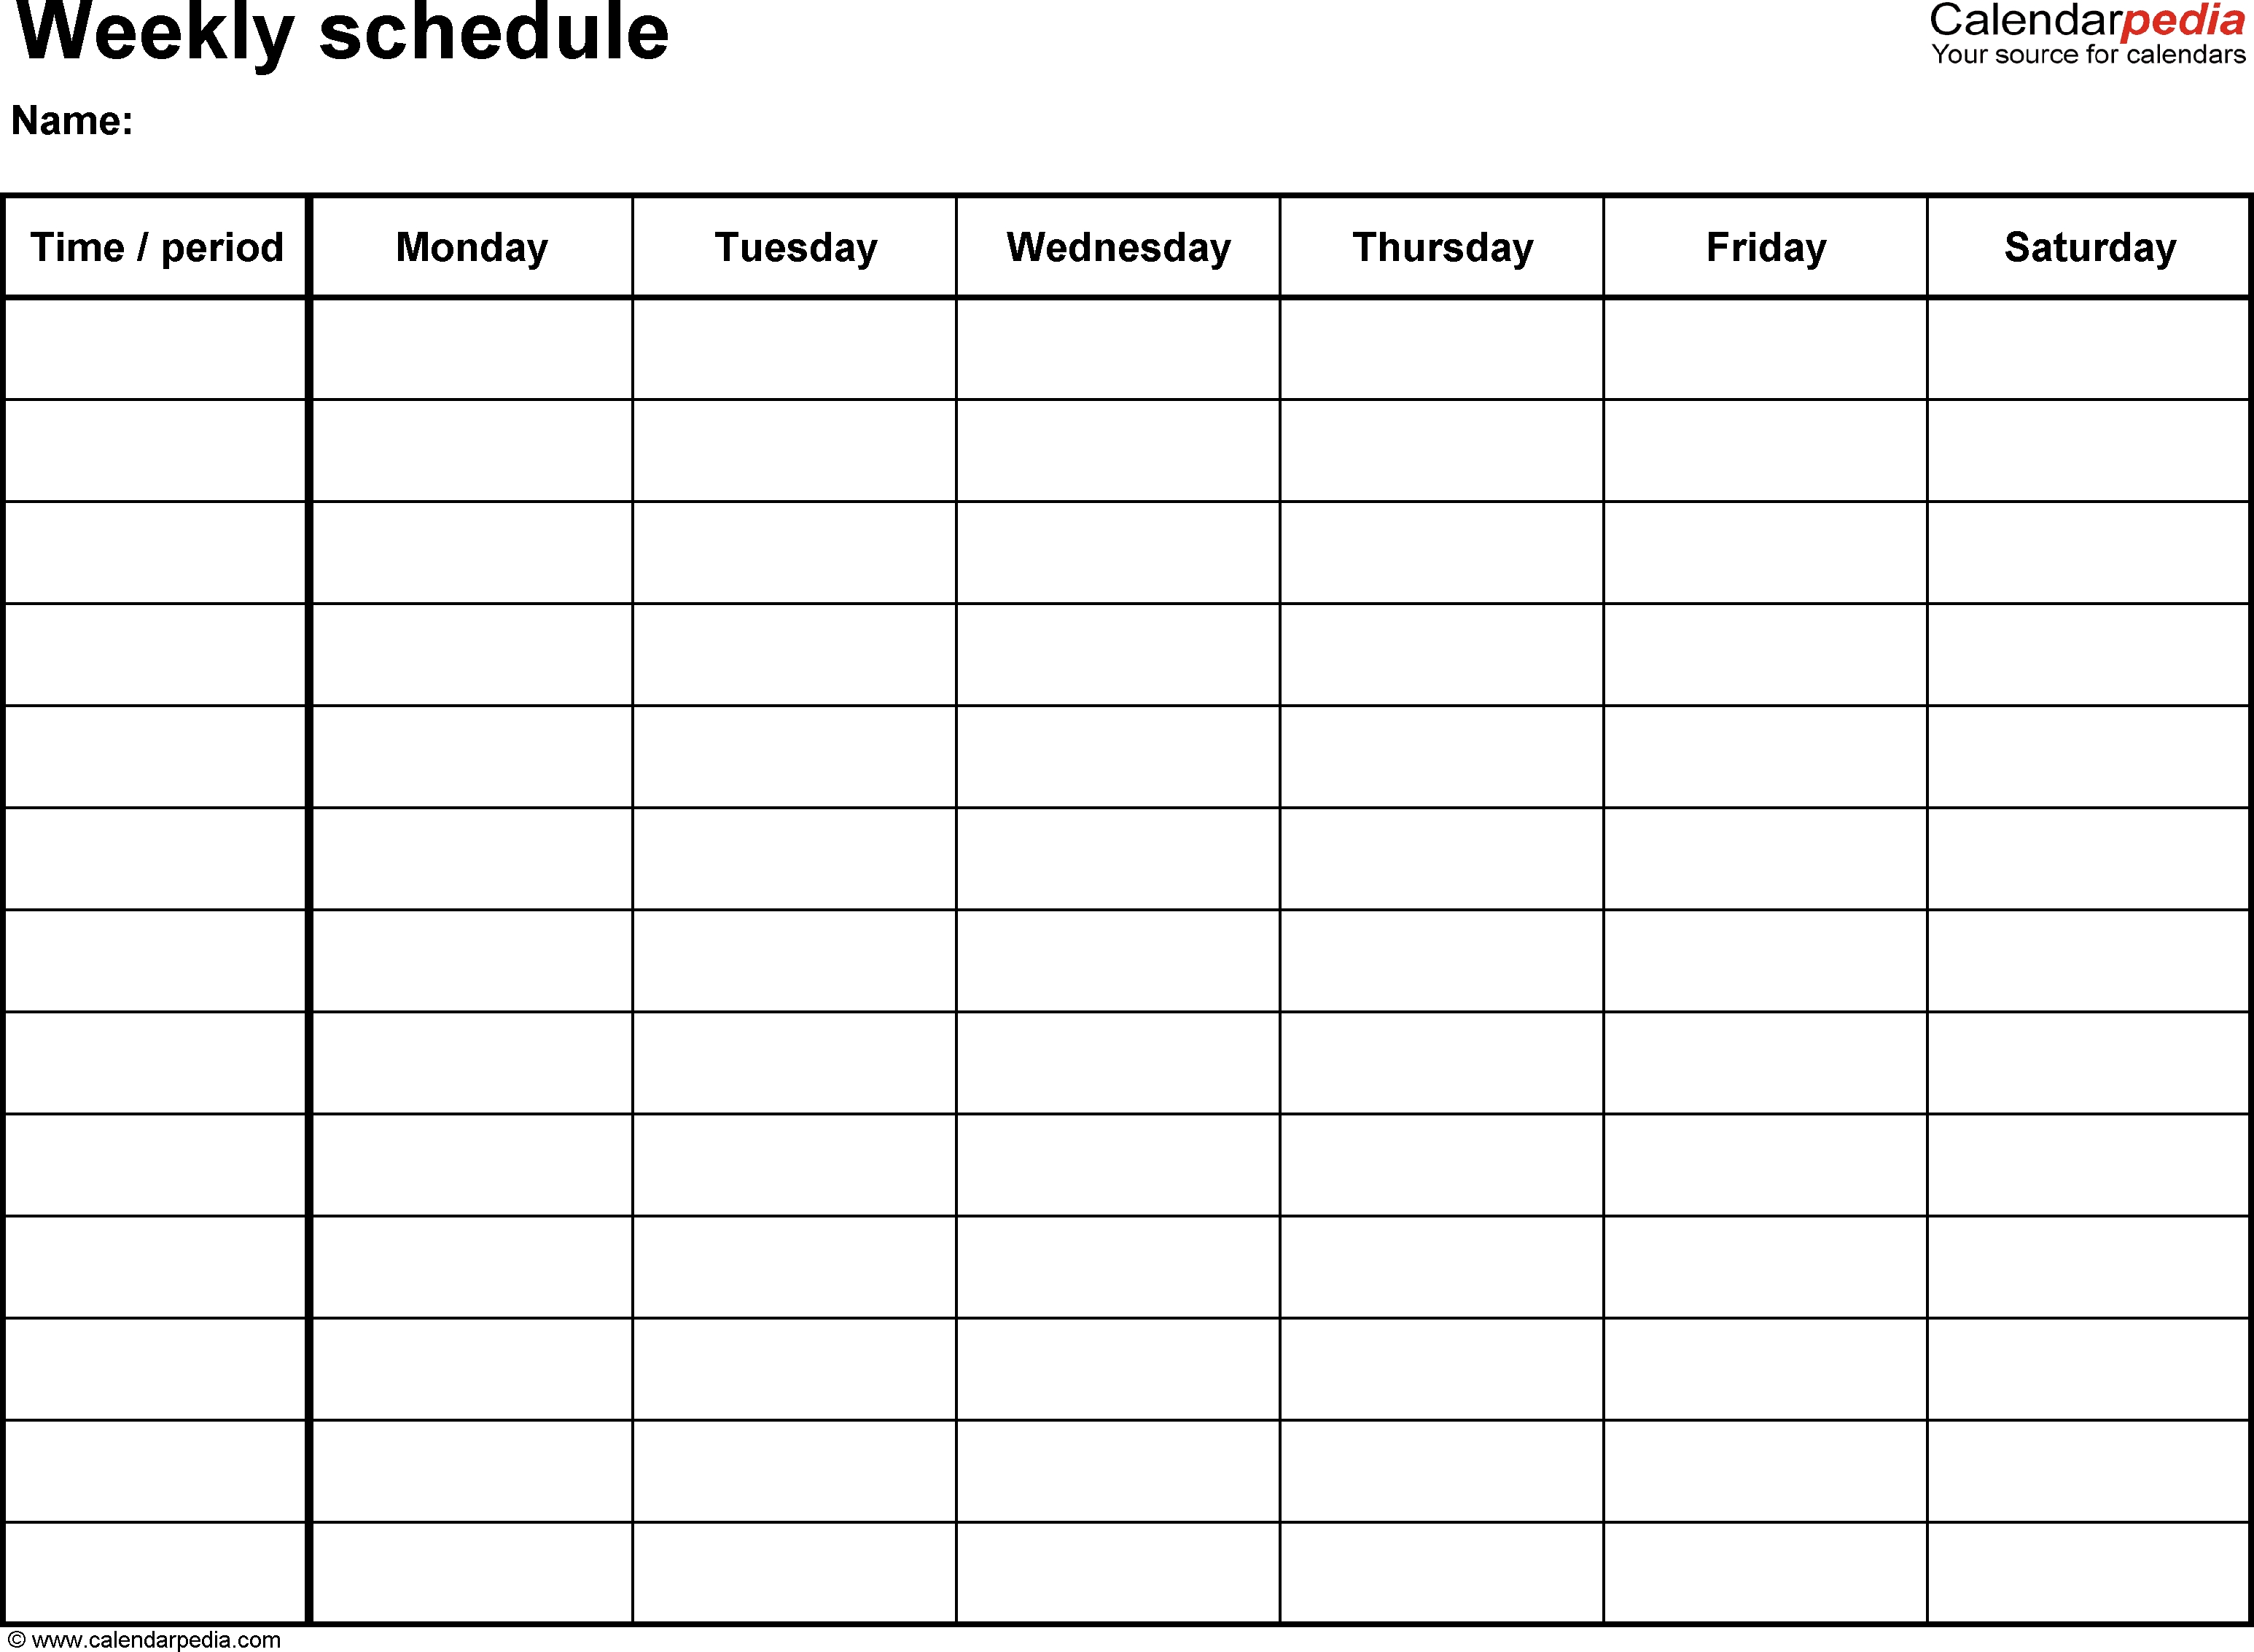 Free Weekly Schedule Templates For Pdf - 18 Templates inside Printable Weekly Schedule With Hours Monday To Friday